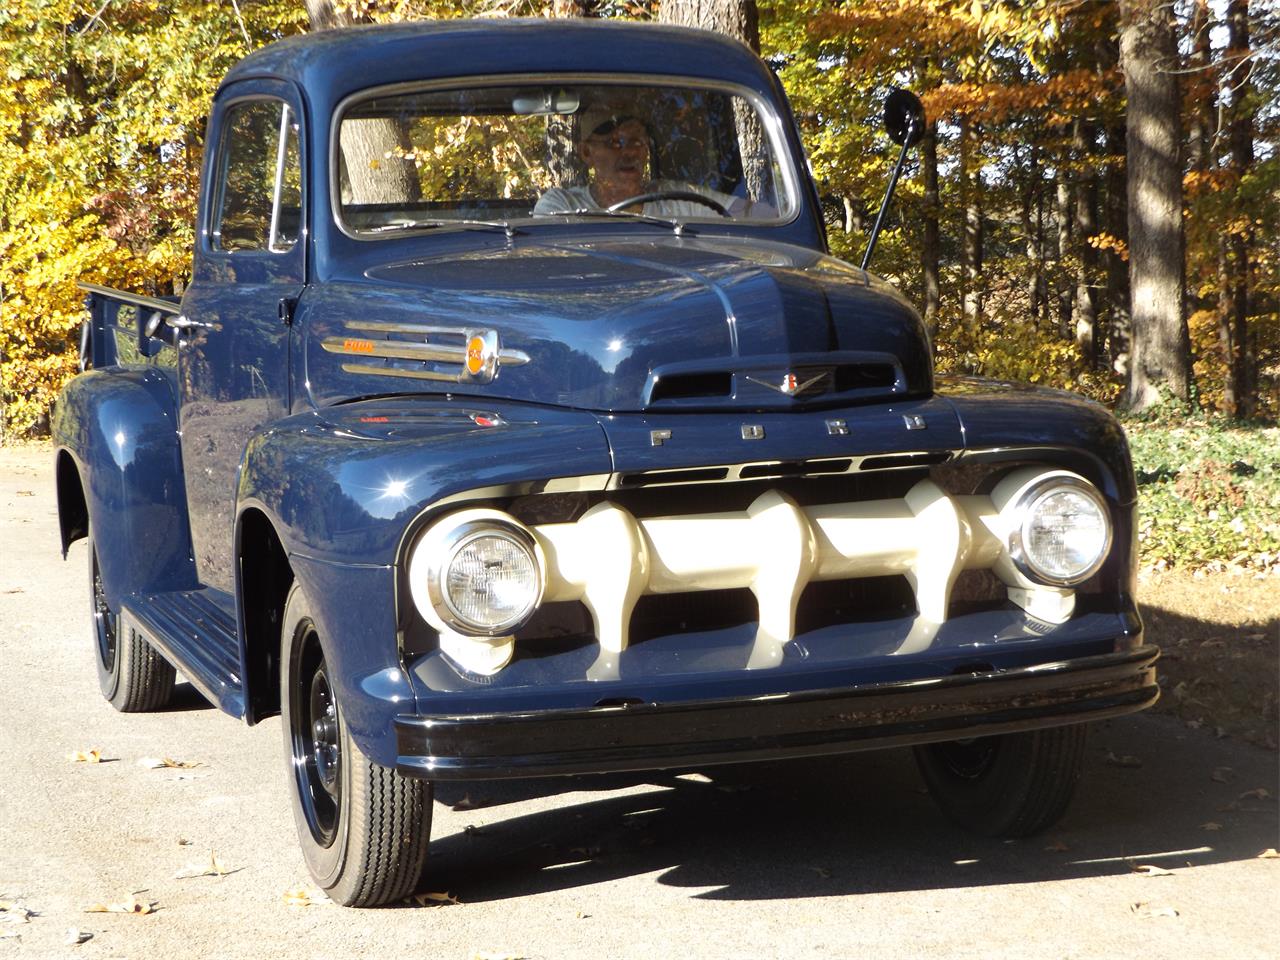 1952 Ford Truck For Sale Classiccarscom Cc 1002603